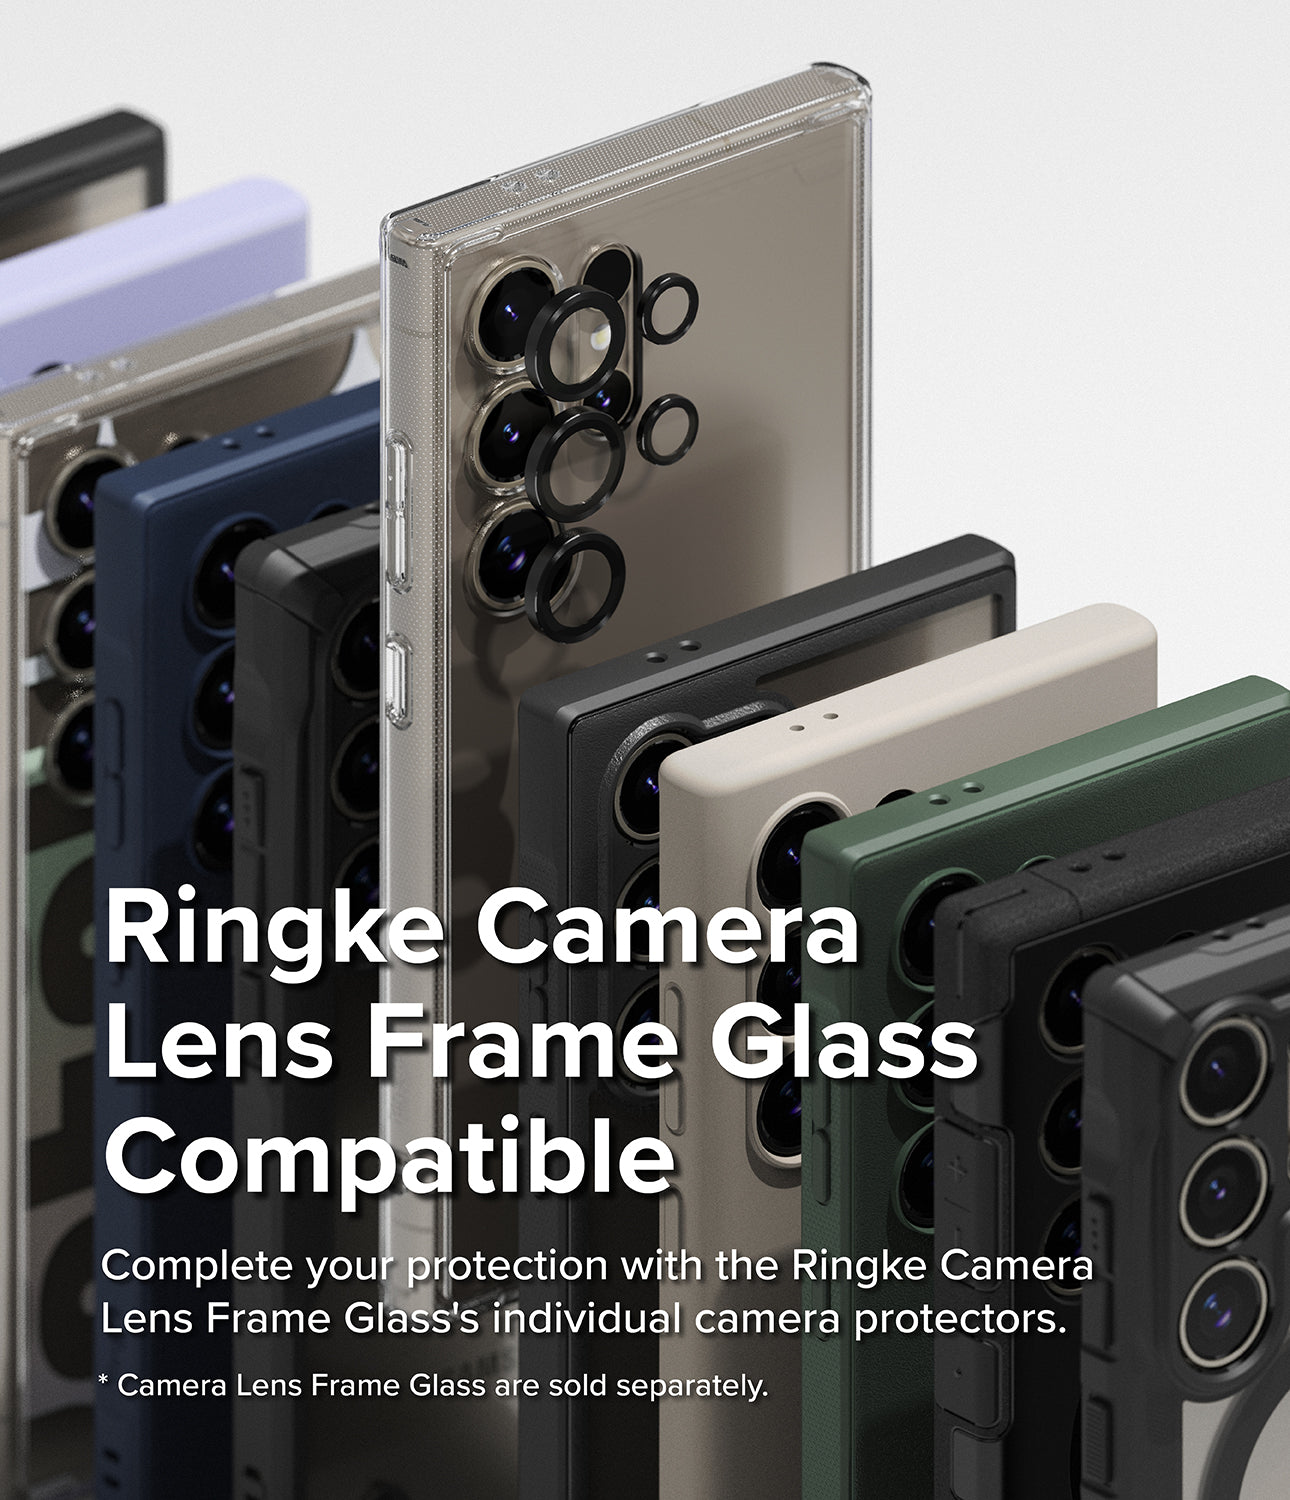 Galaxy S24 Ultra Case | Onyx - NavyGalaxy S24 Ultra Case | Onyx - Navy - Ringke Camera Lens Frame Glass Compatible. Complete your protection with the Ringke Camera Lens Frame Glass' individual camera protectors.